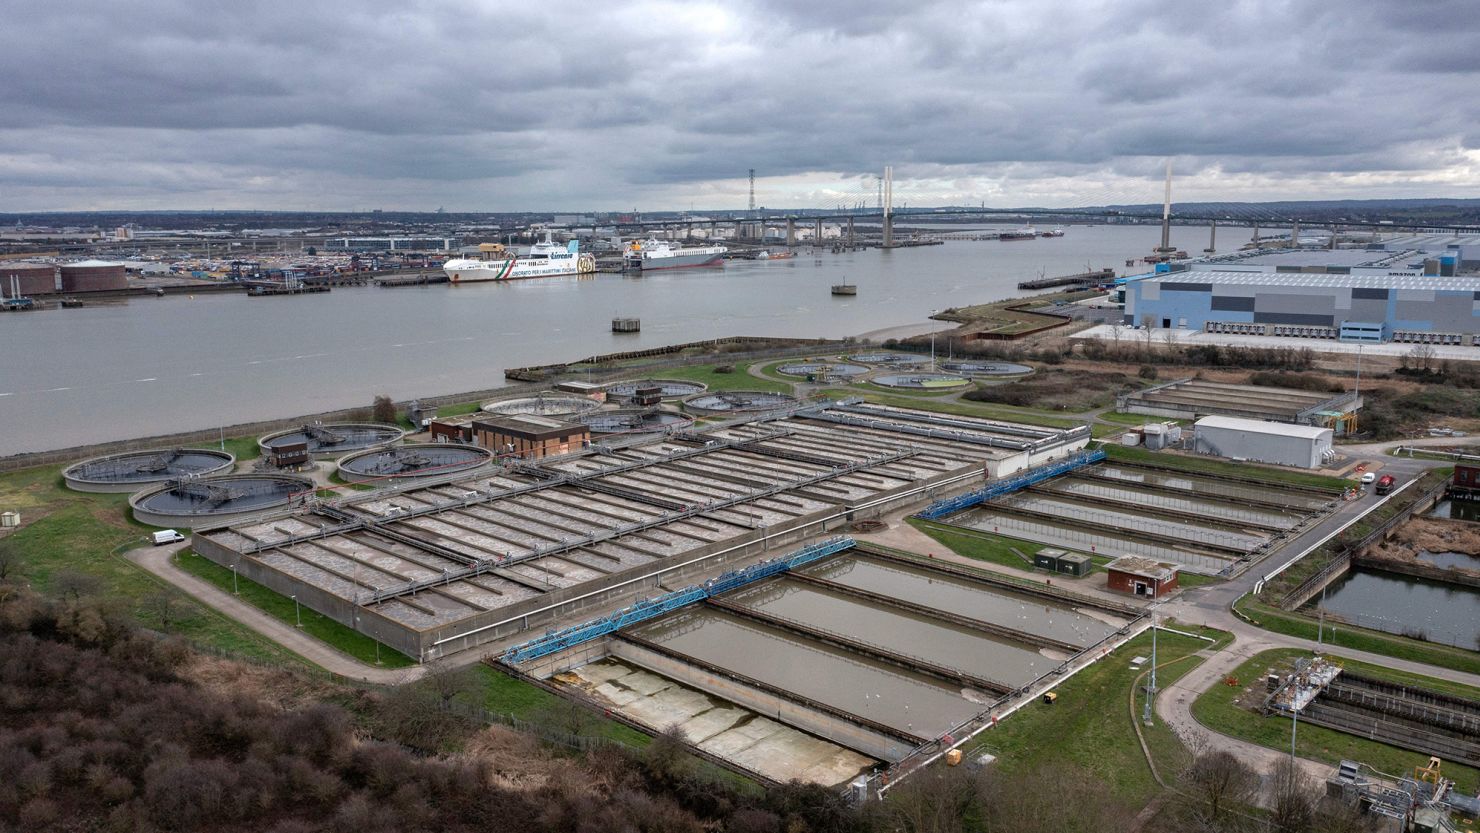 The Thames Water Long Reach water treatment facility east of London